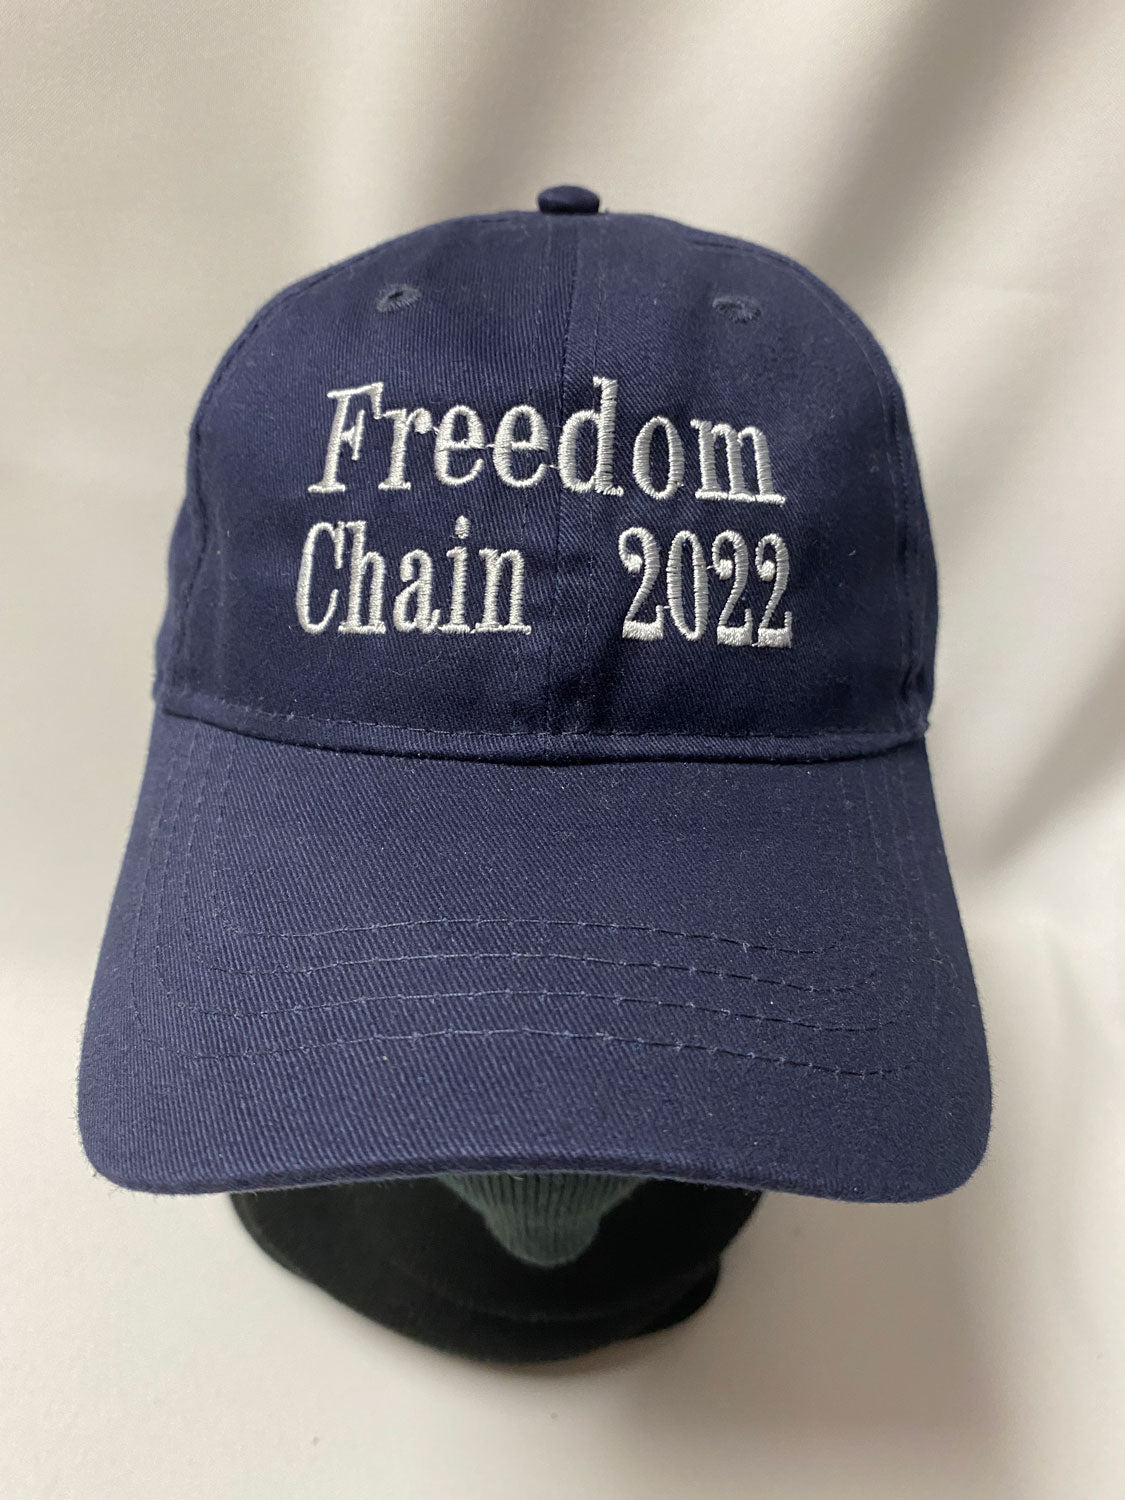 BALL CAP FREEDOM CHAIN 2022 - white embroidery on black